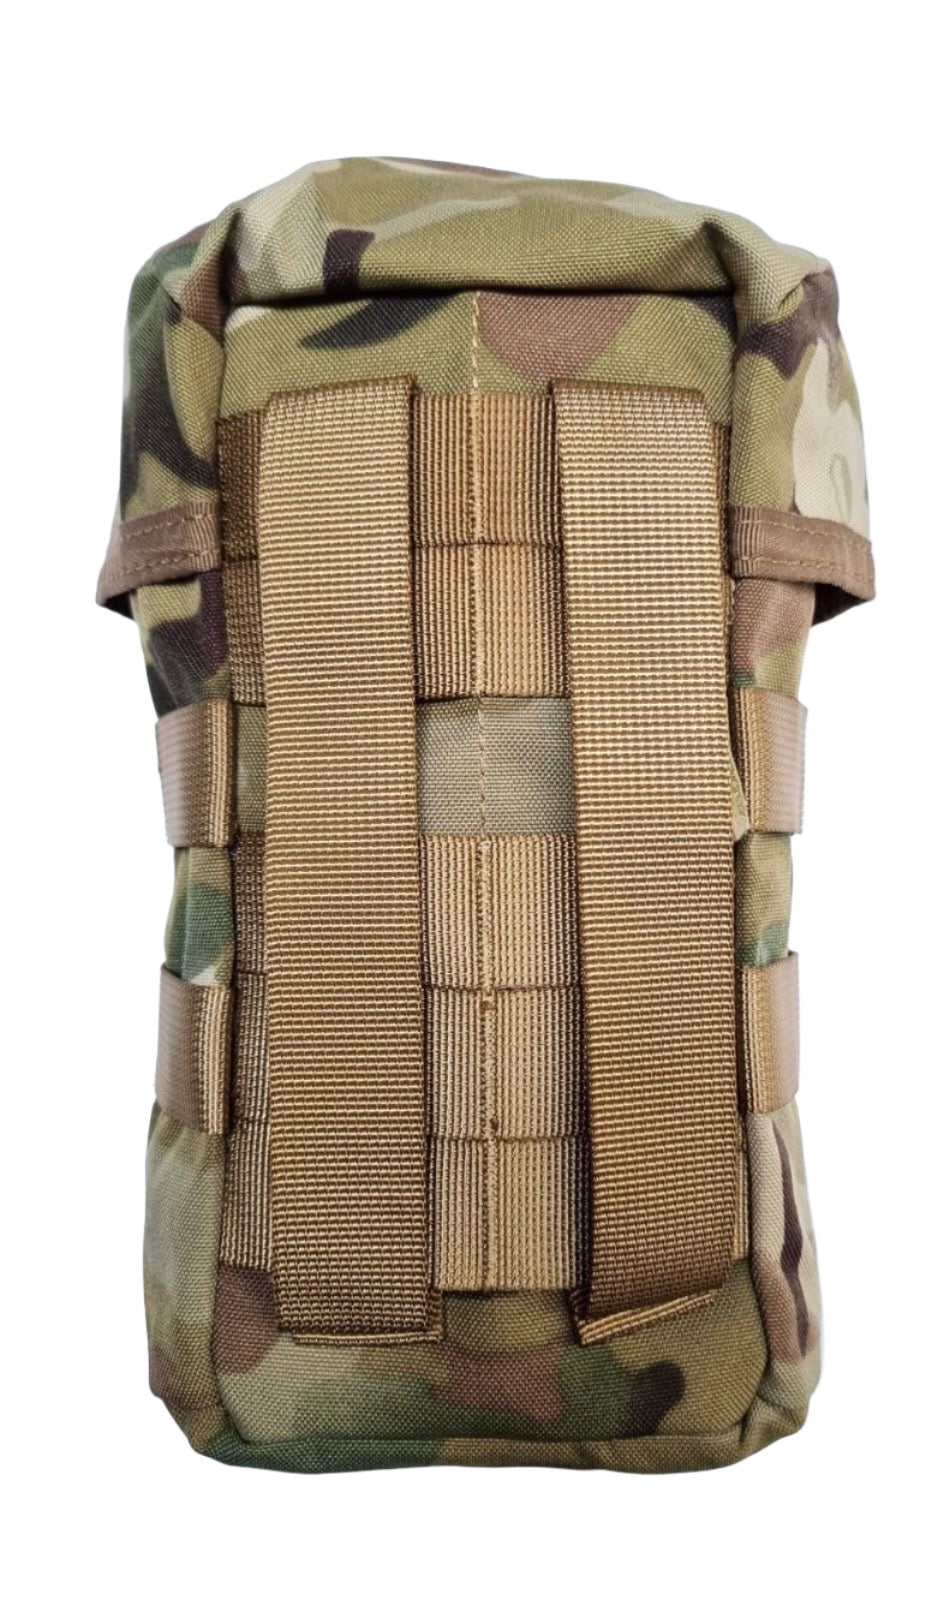 SHE-954 Camouflage  Canteen Pouch Colour UTP Backside view.